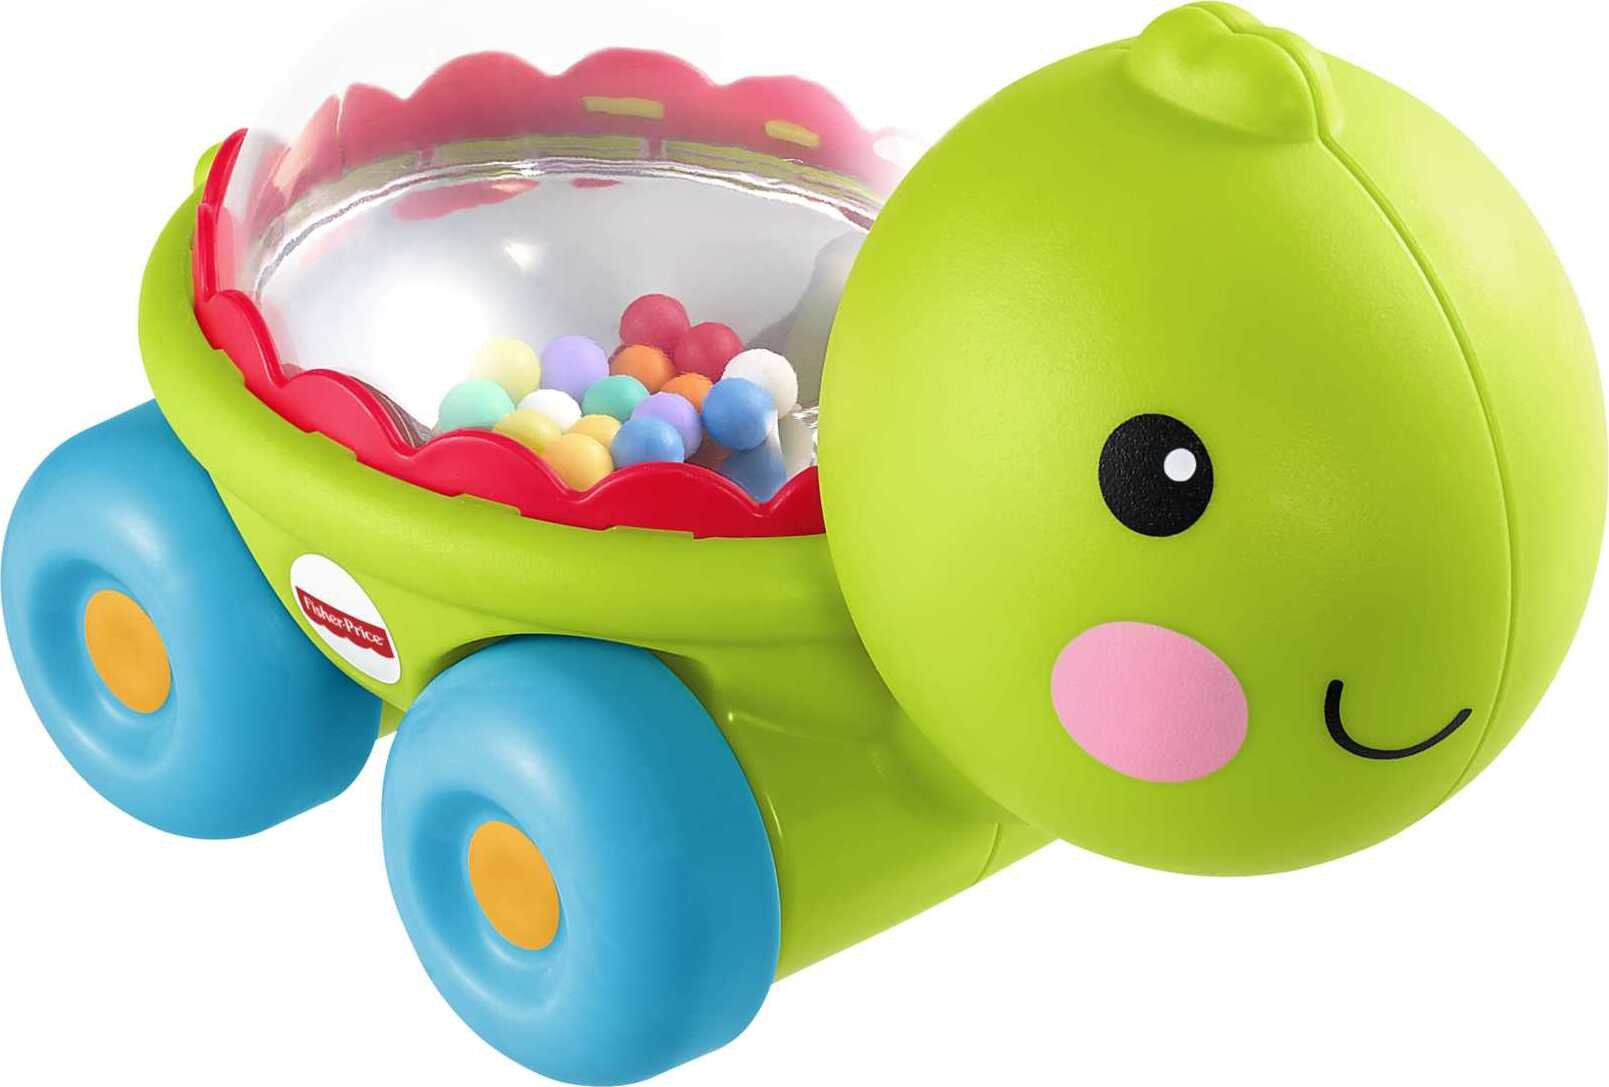 Fisher-Price Poppity Pop Turtle Push-Along Vehicle with Sounds for Infant Crawling Play - image 1 of 6